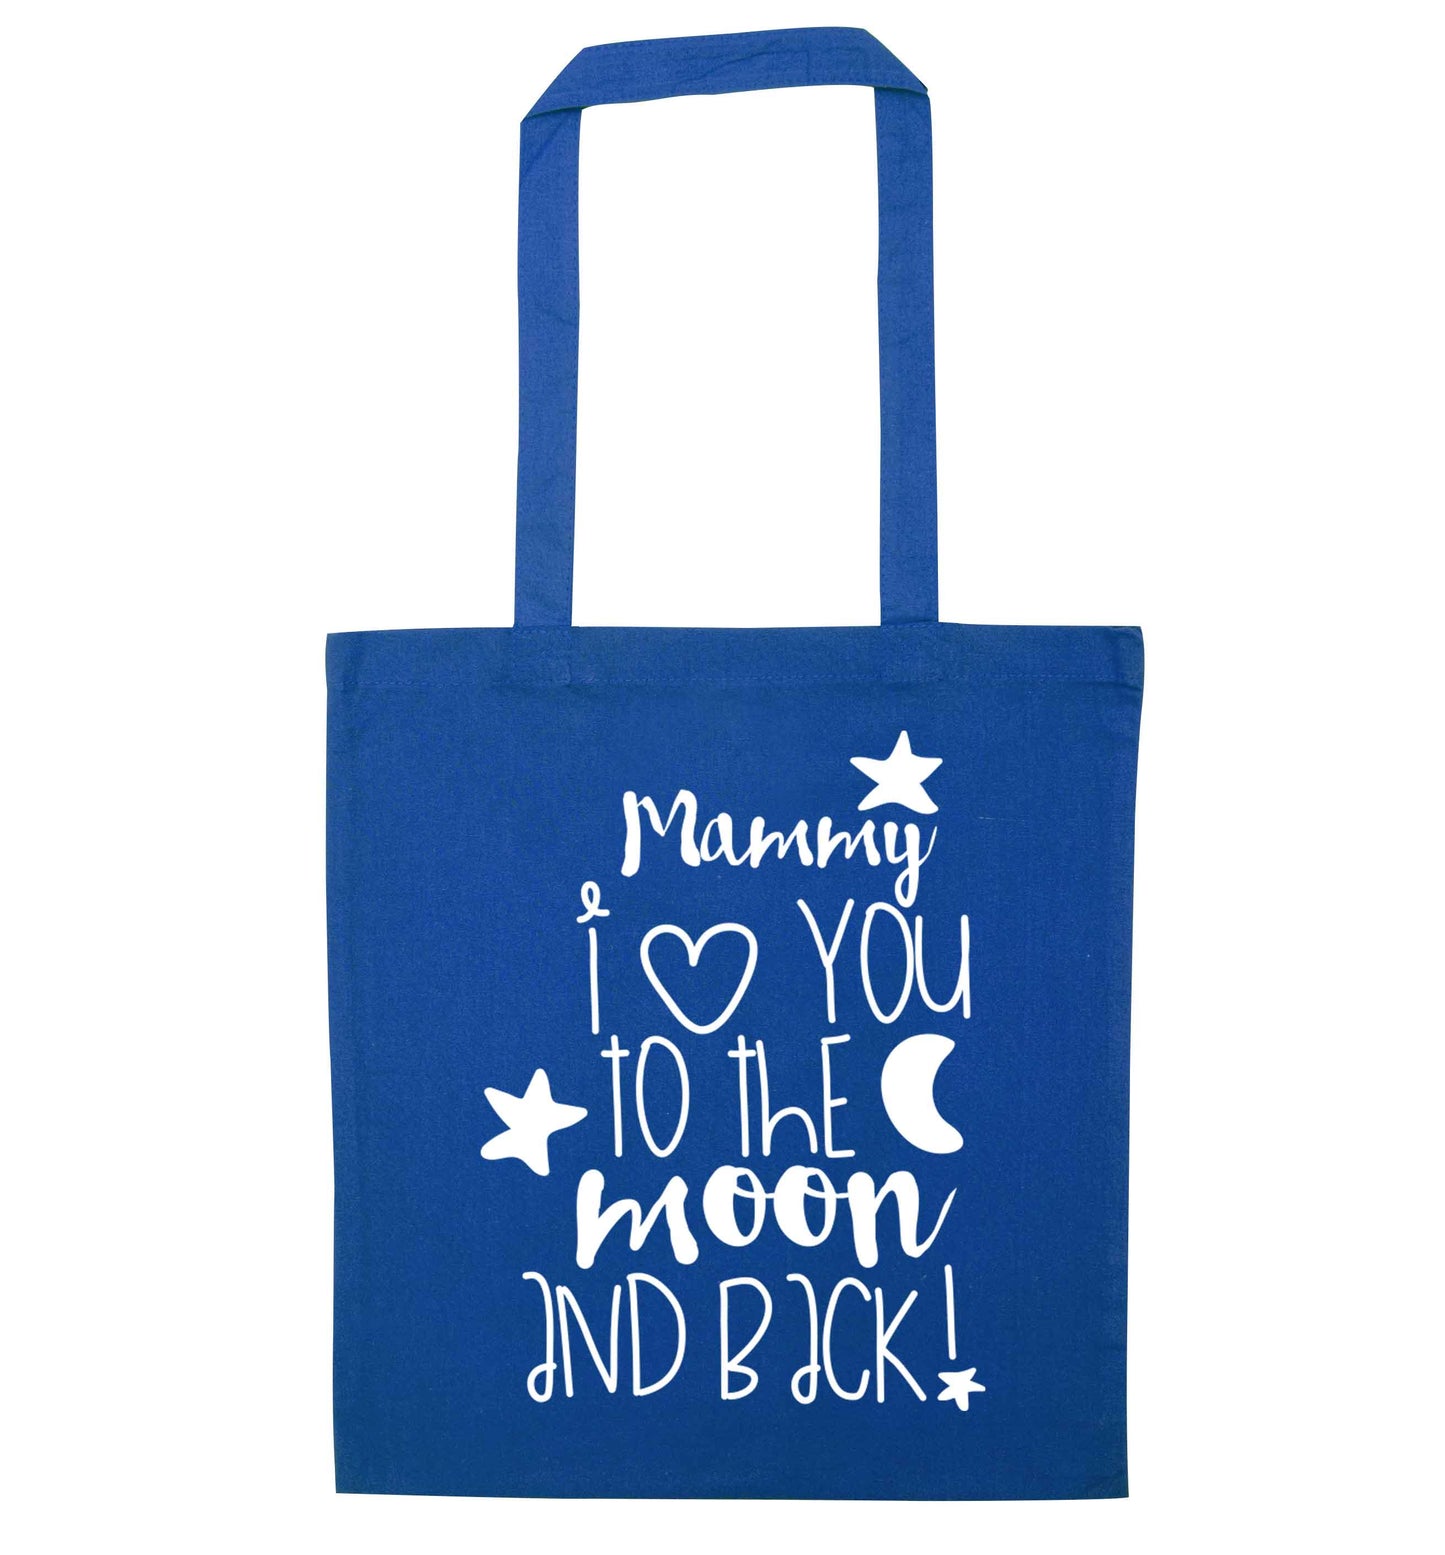 Mammy I love you to the moon and back blue tote bag